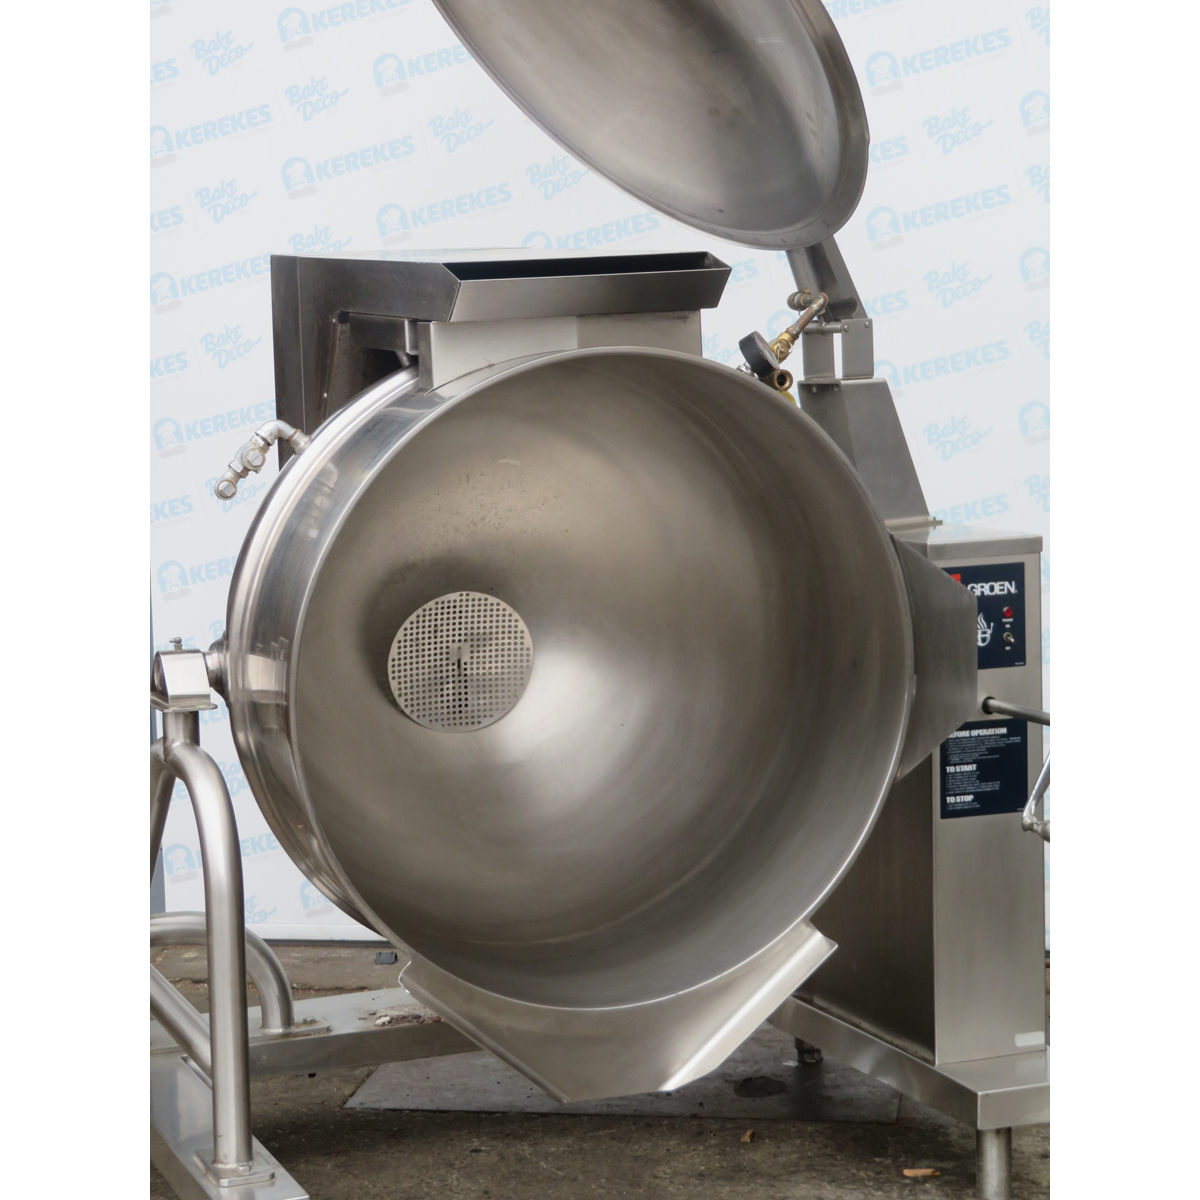 Groen DHT-80 80 Gallon Tilt Kettle, Used Great Condition image 4